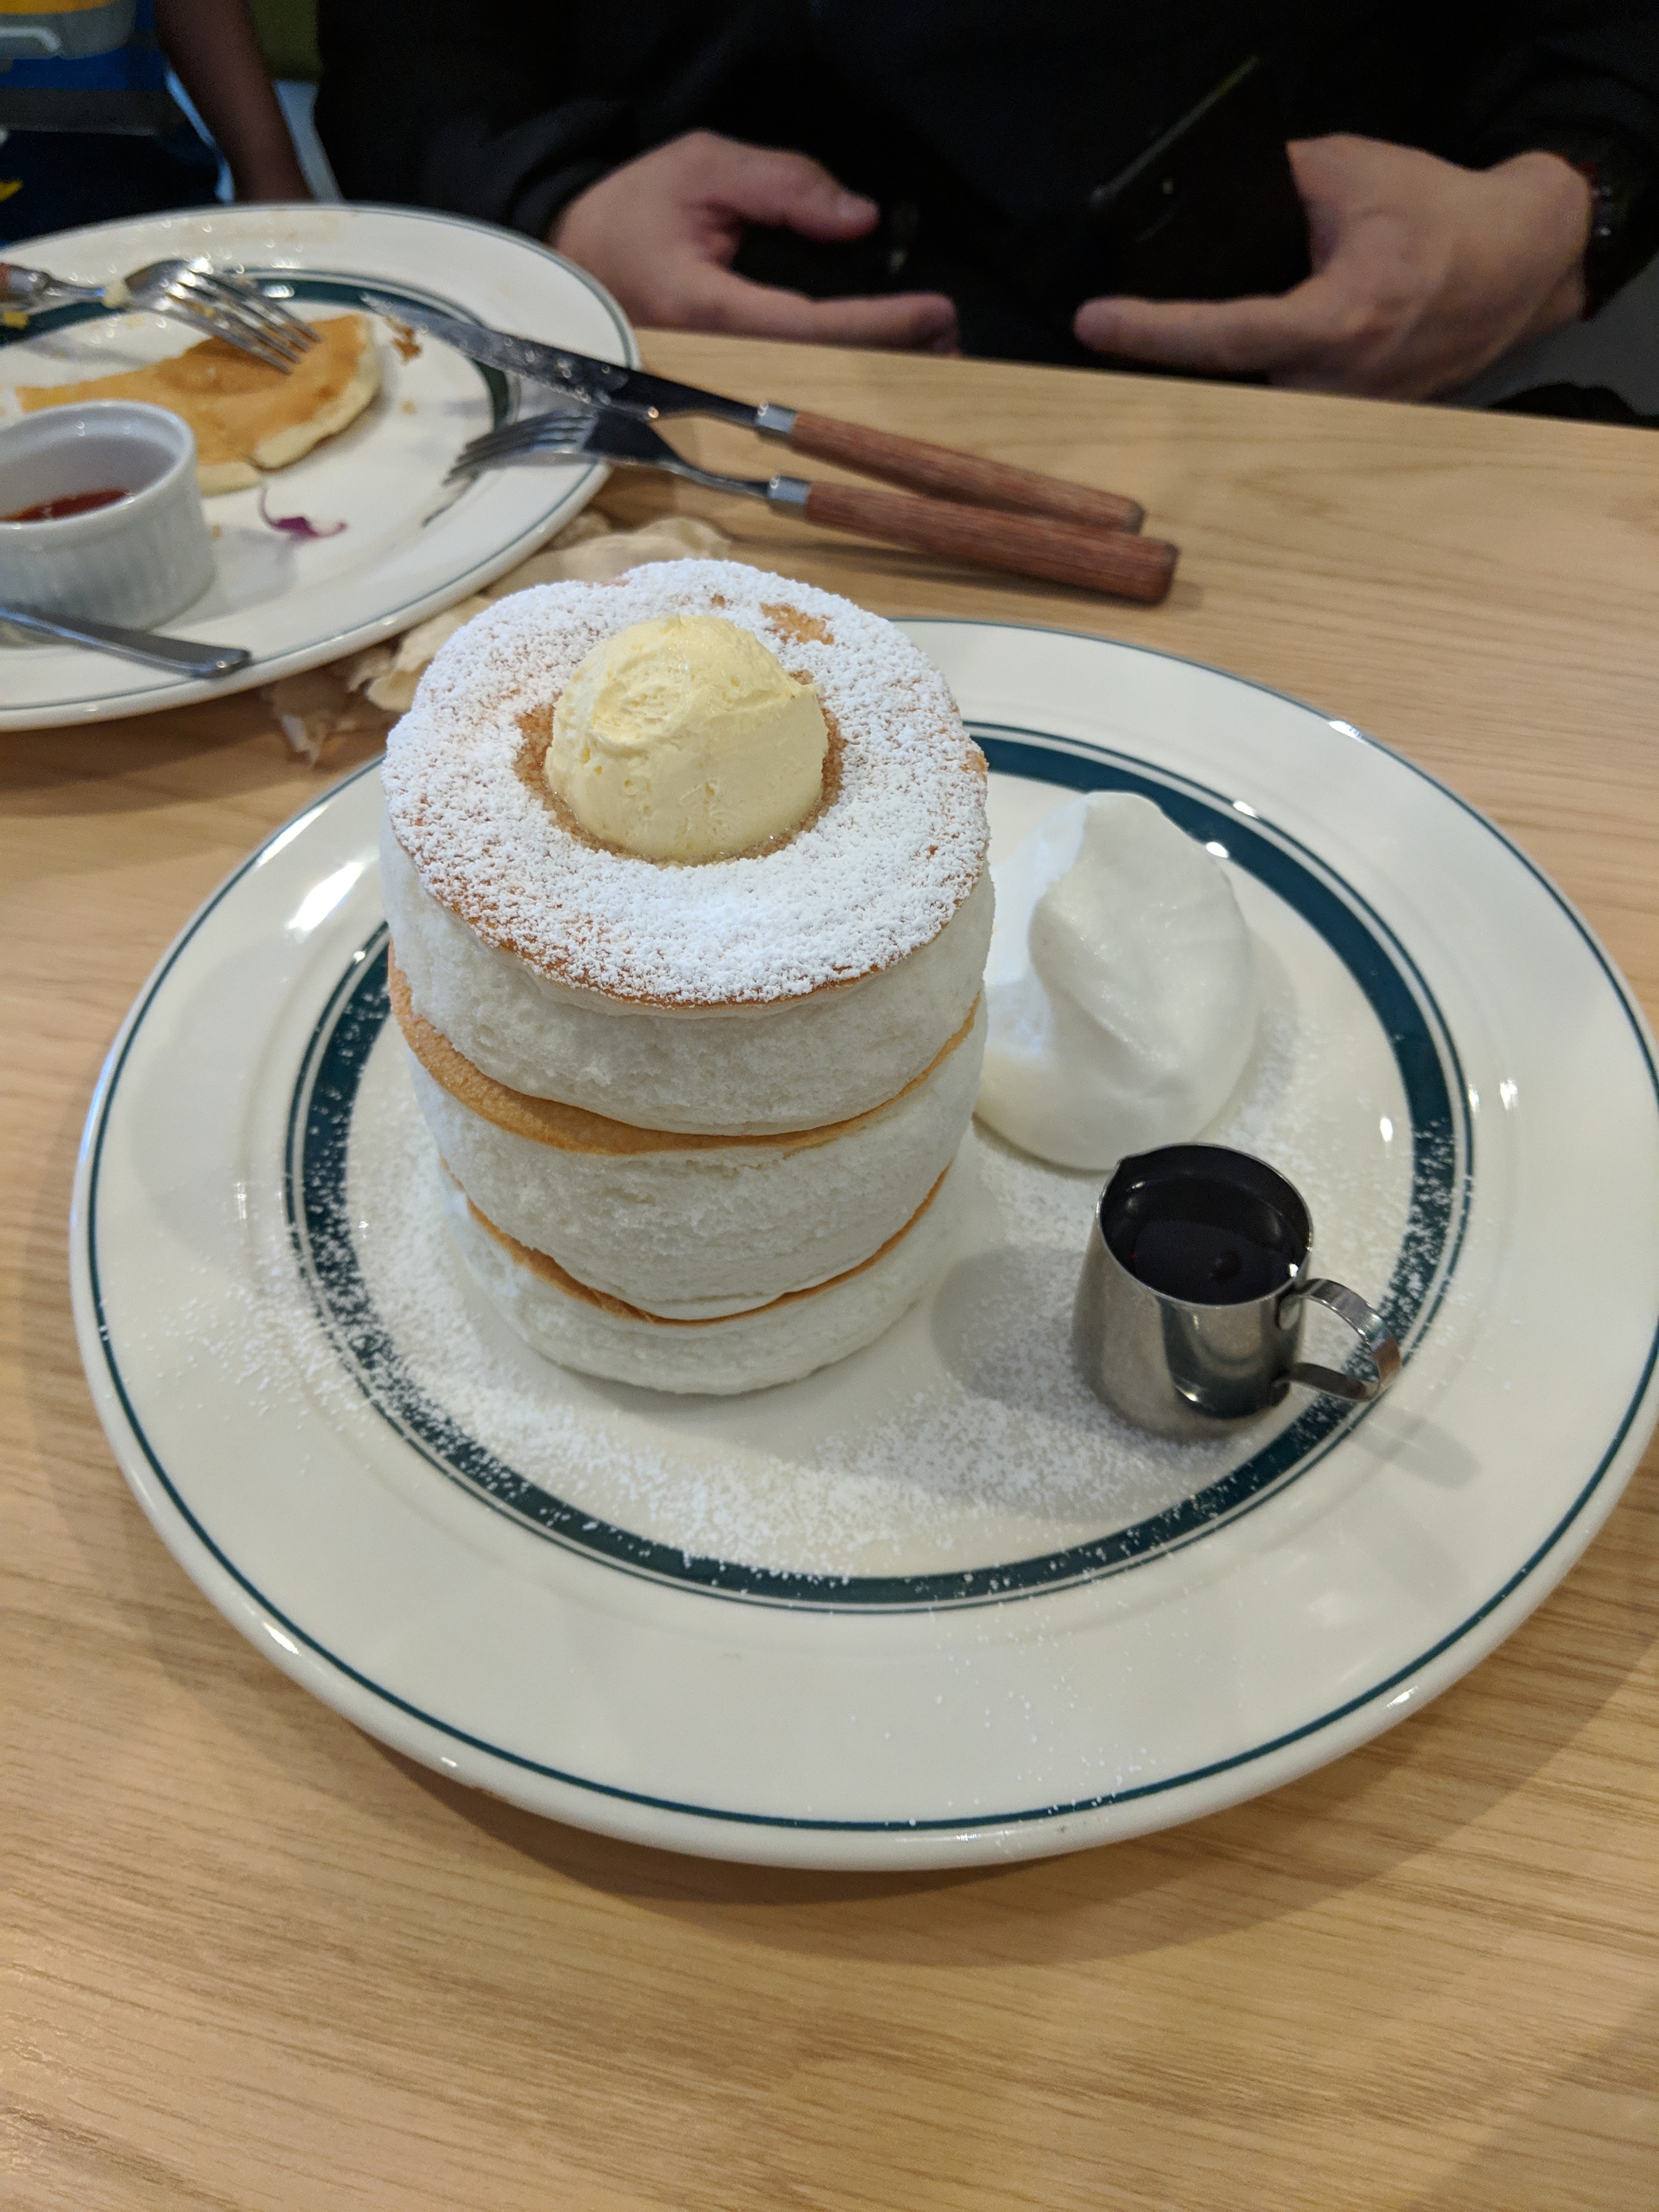 An order of Gram's fluffy pancakes, with a regular pancake in the back for comparison